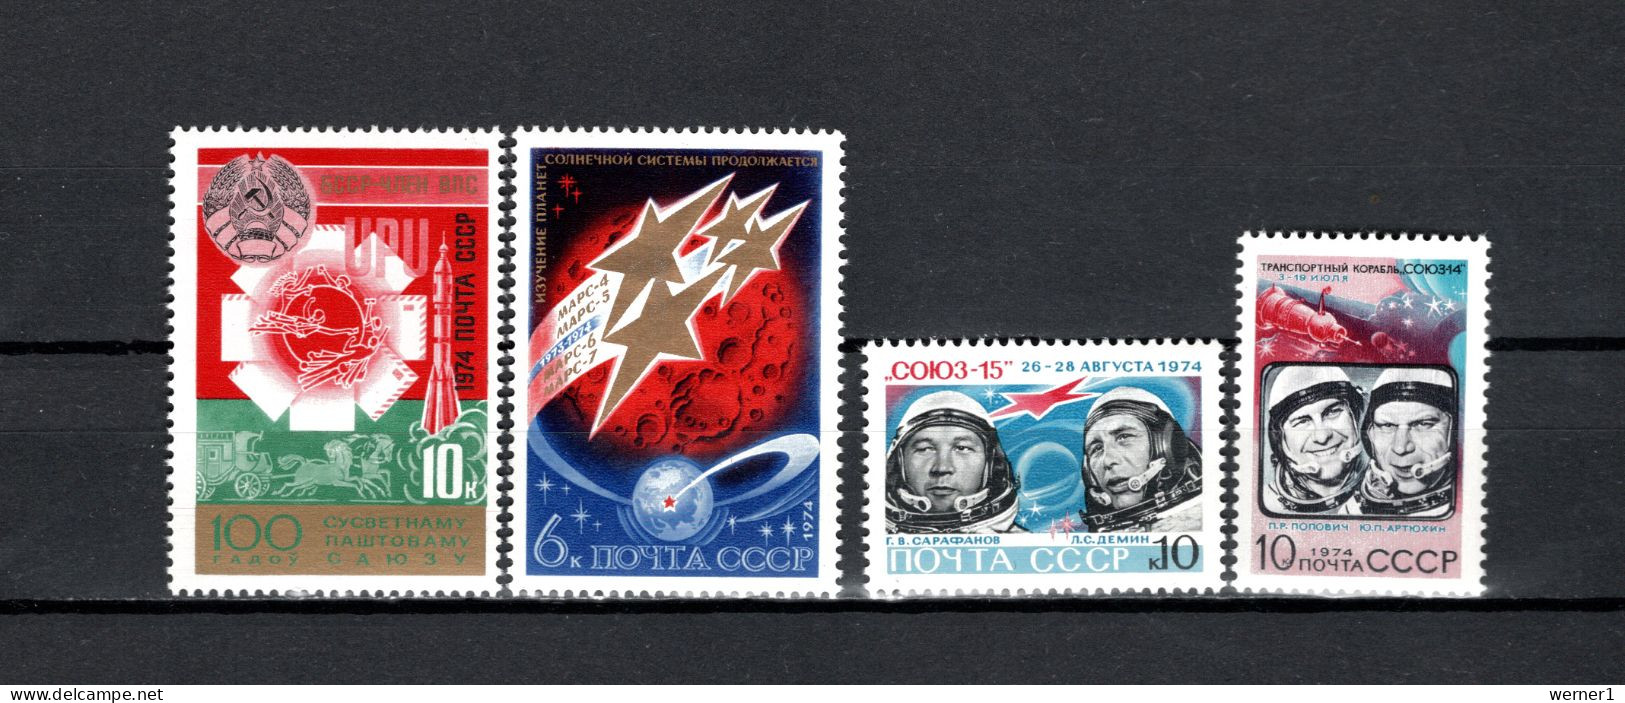 USSR Russia 1974 Space, UPU Centenary, Space Achievement, Soyuz 14 And 15, 4 Stamps MNH - Rusia & URSS